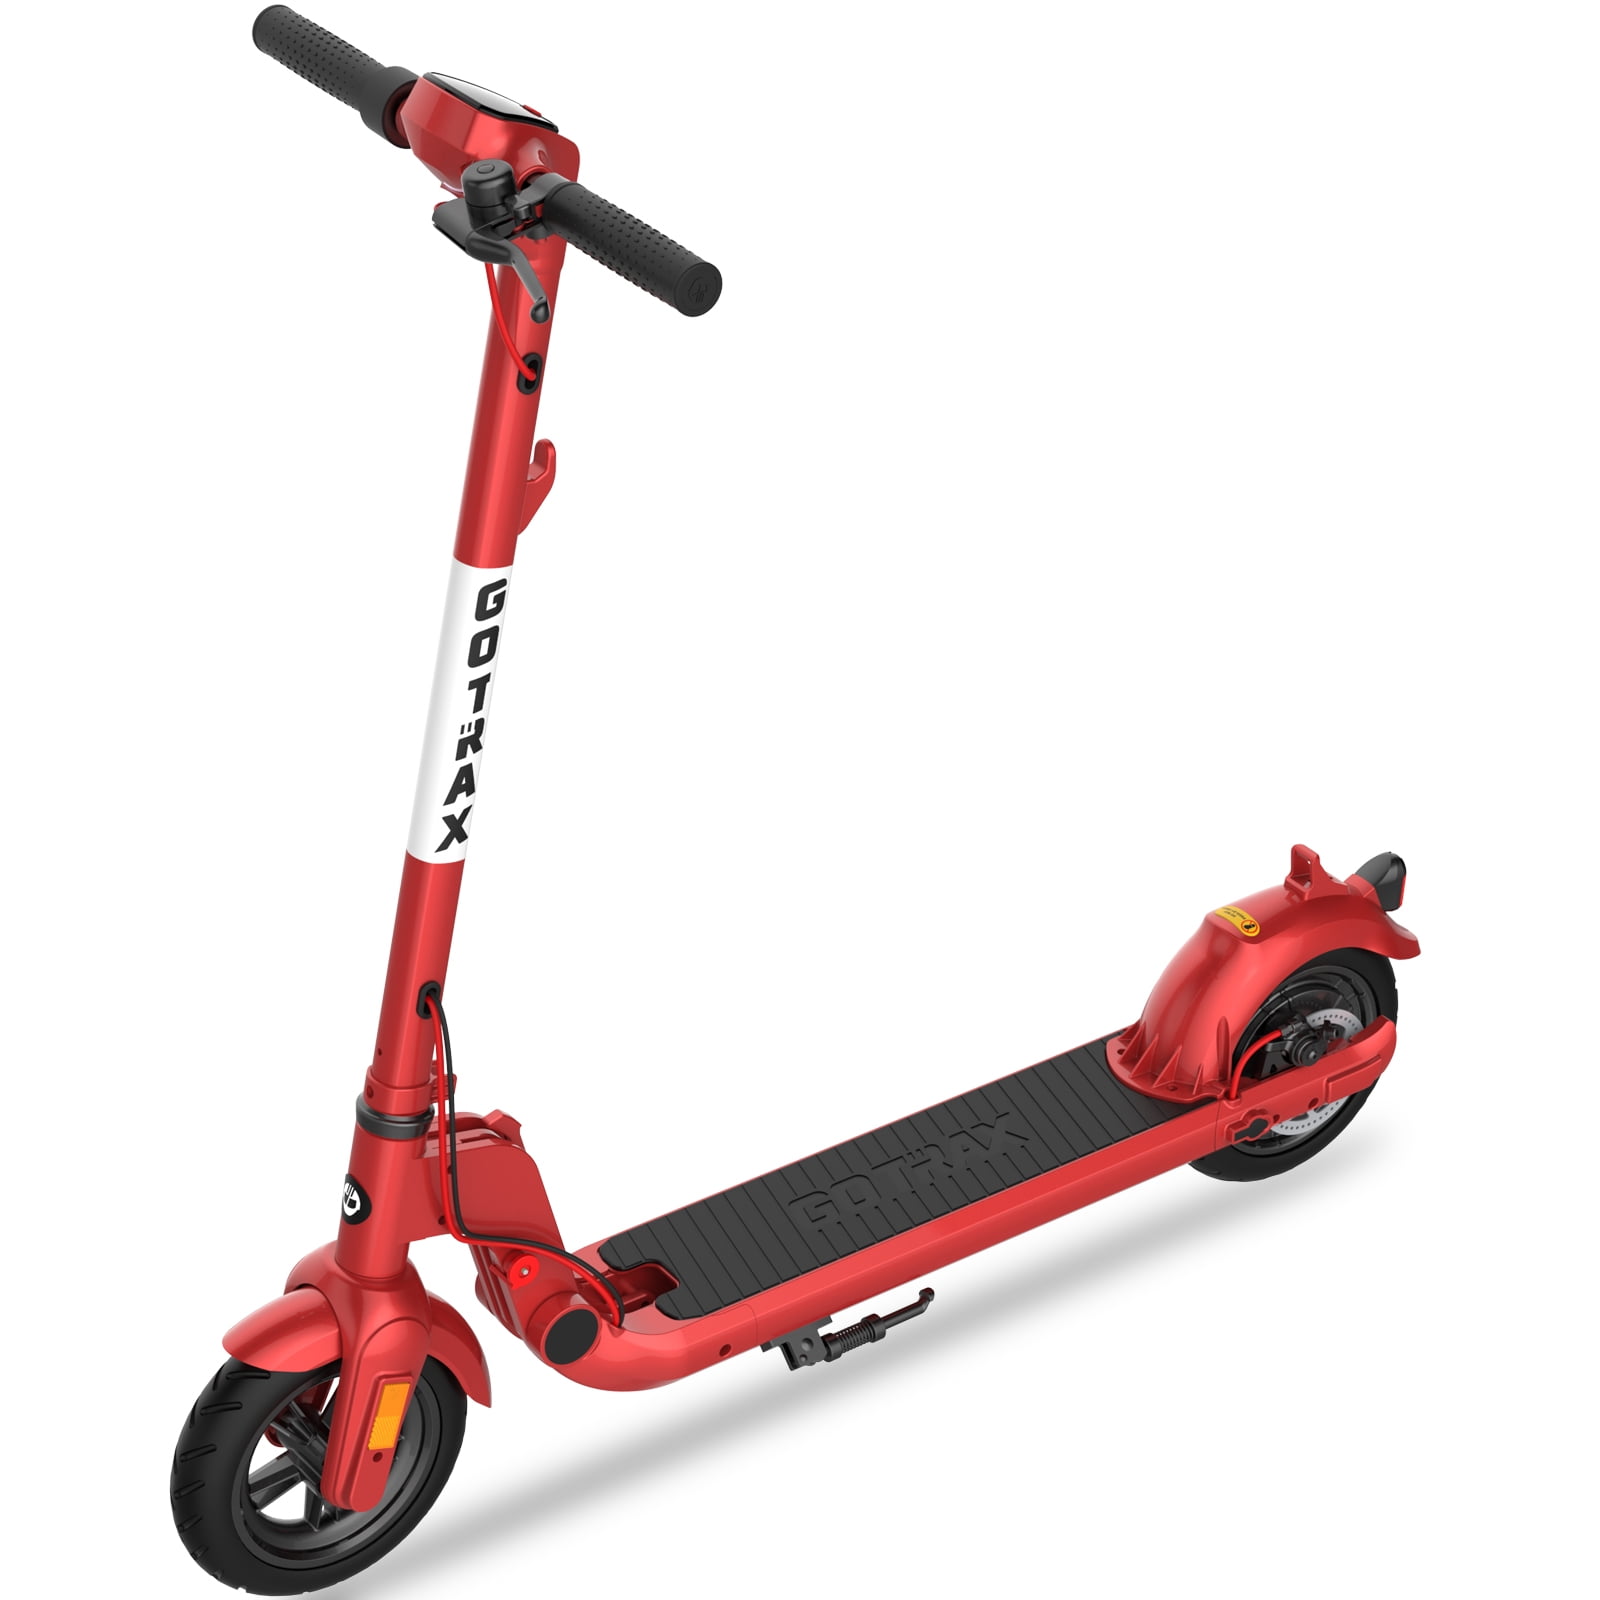 12 MPH & 7 Miles Range E Kick Scooters for Kids Teens Gotrax Vibe Electric Kick Scooter 6.5 Foldable Commuting Scooter for Kids 9-15 Boys and Girls